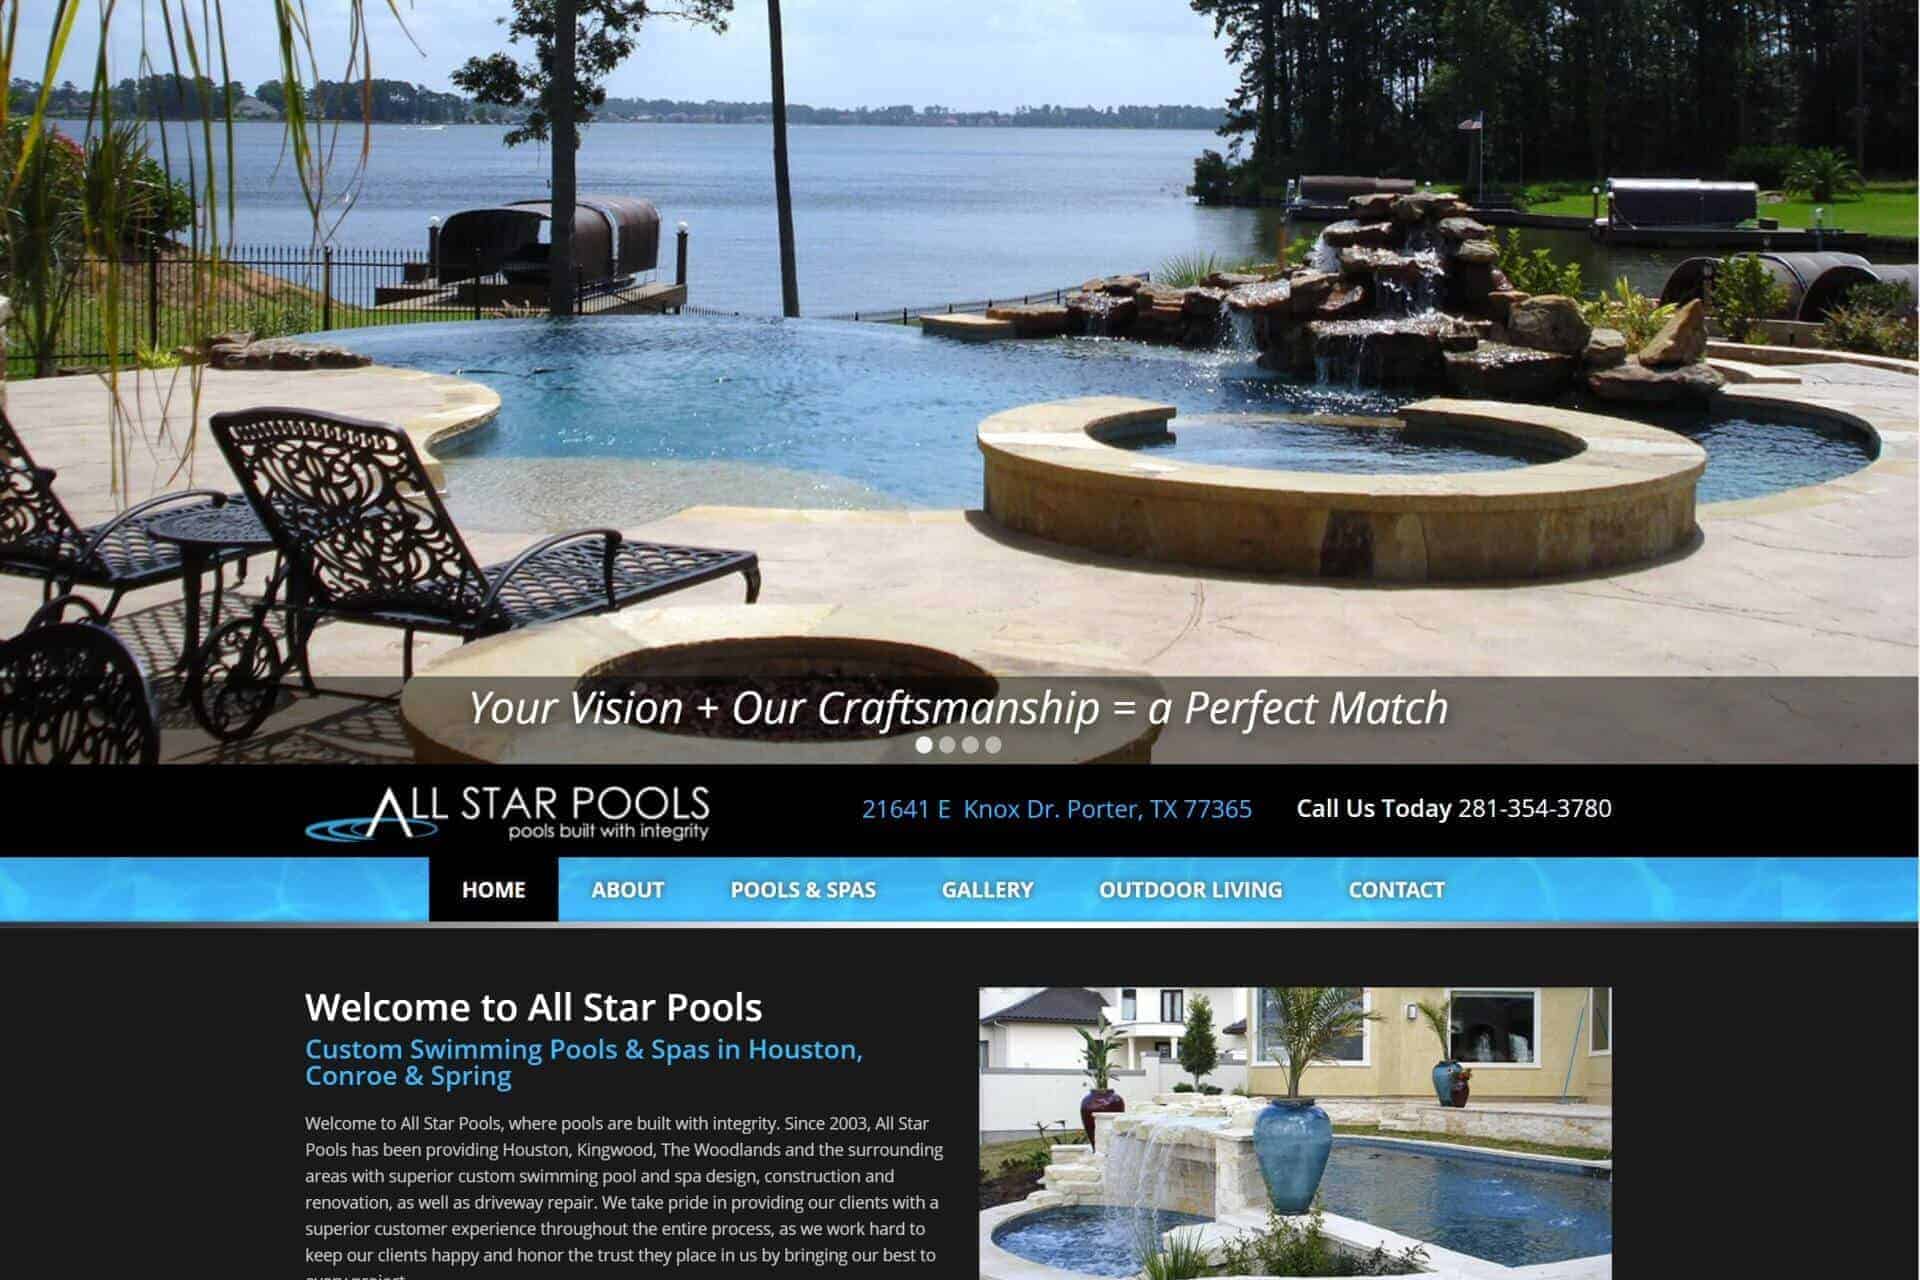 All Star Pools by Impeccable Network Services